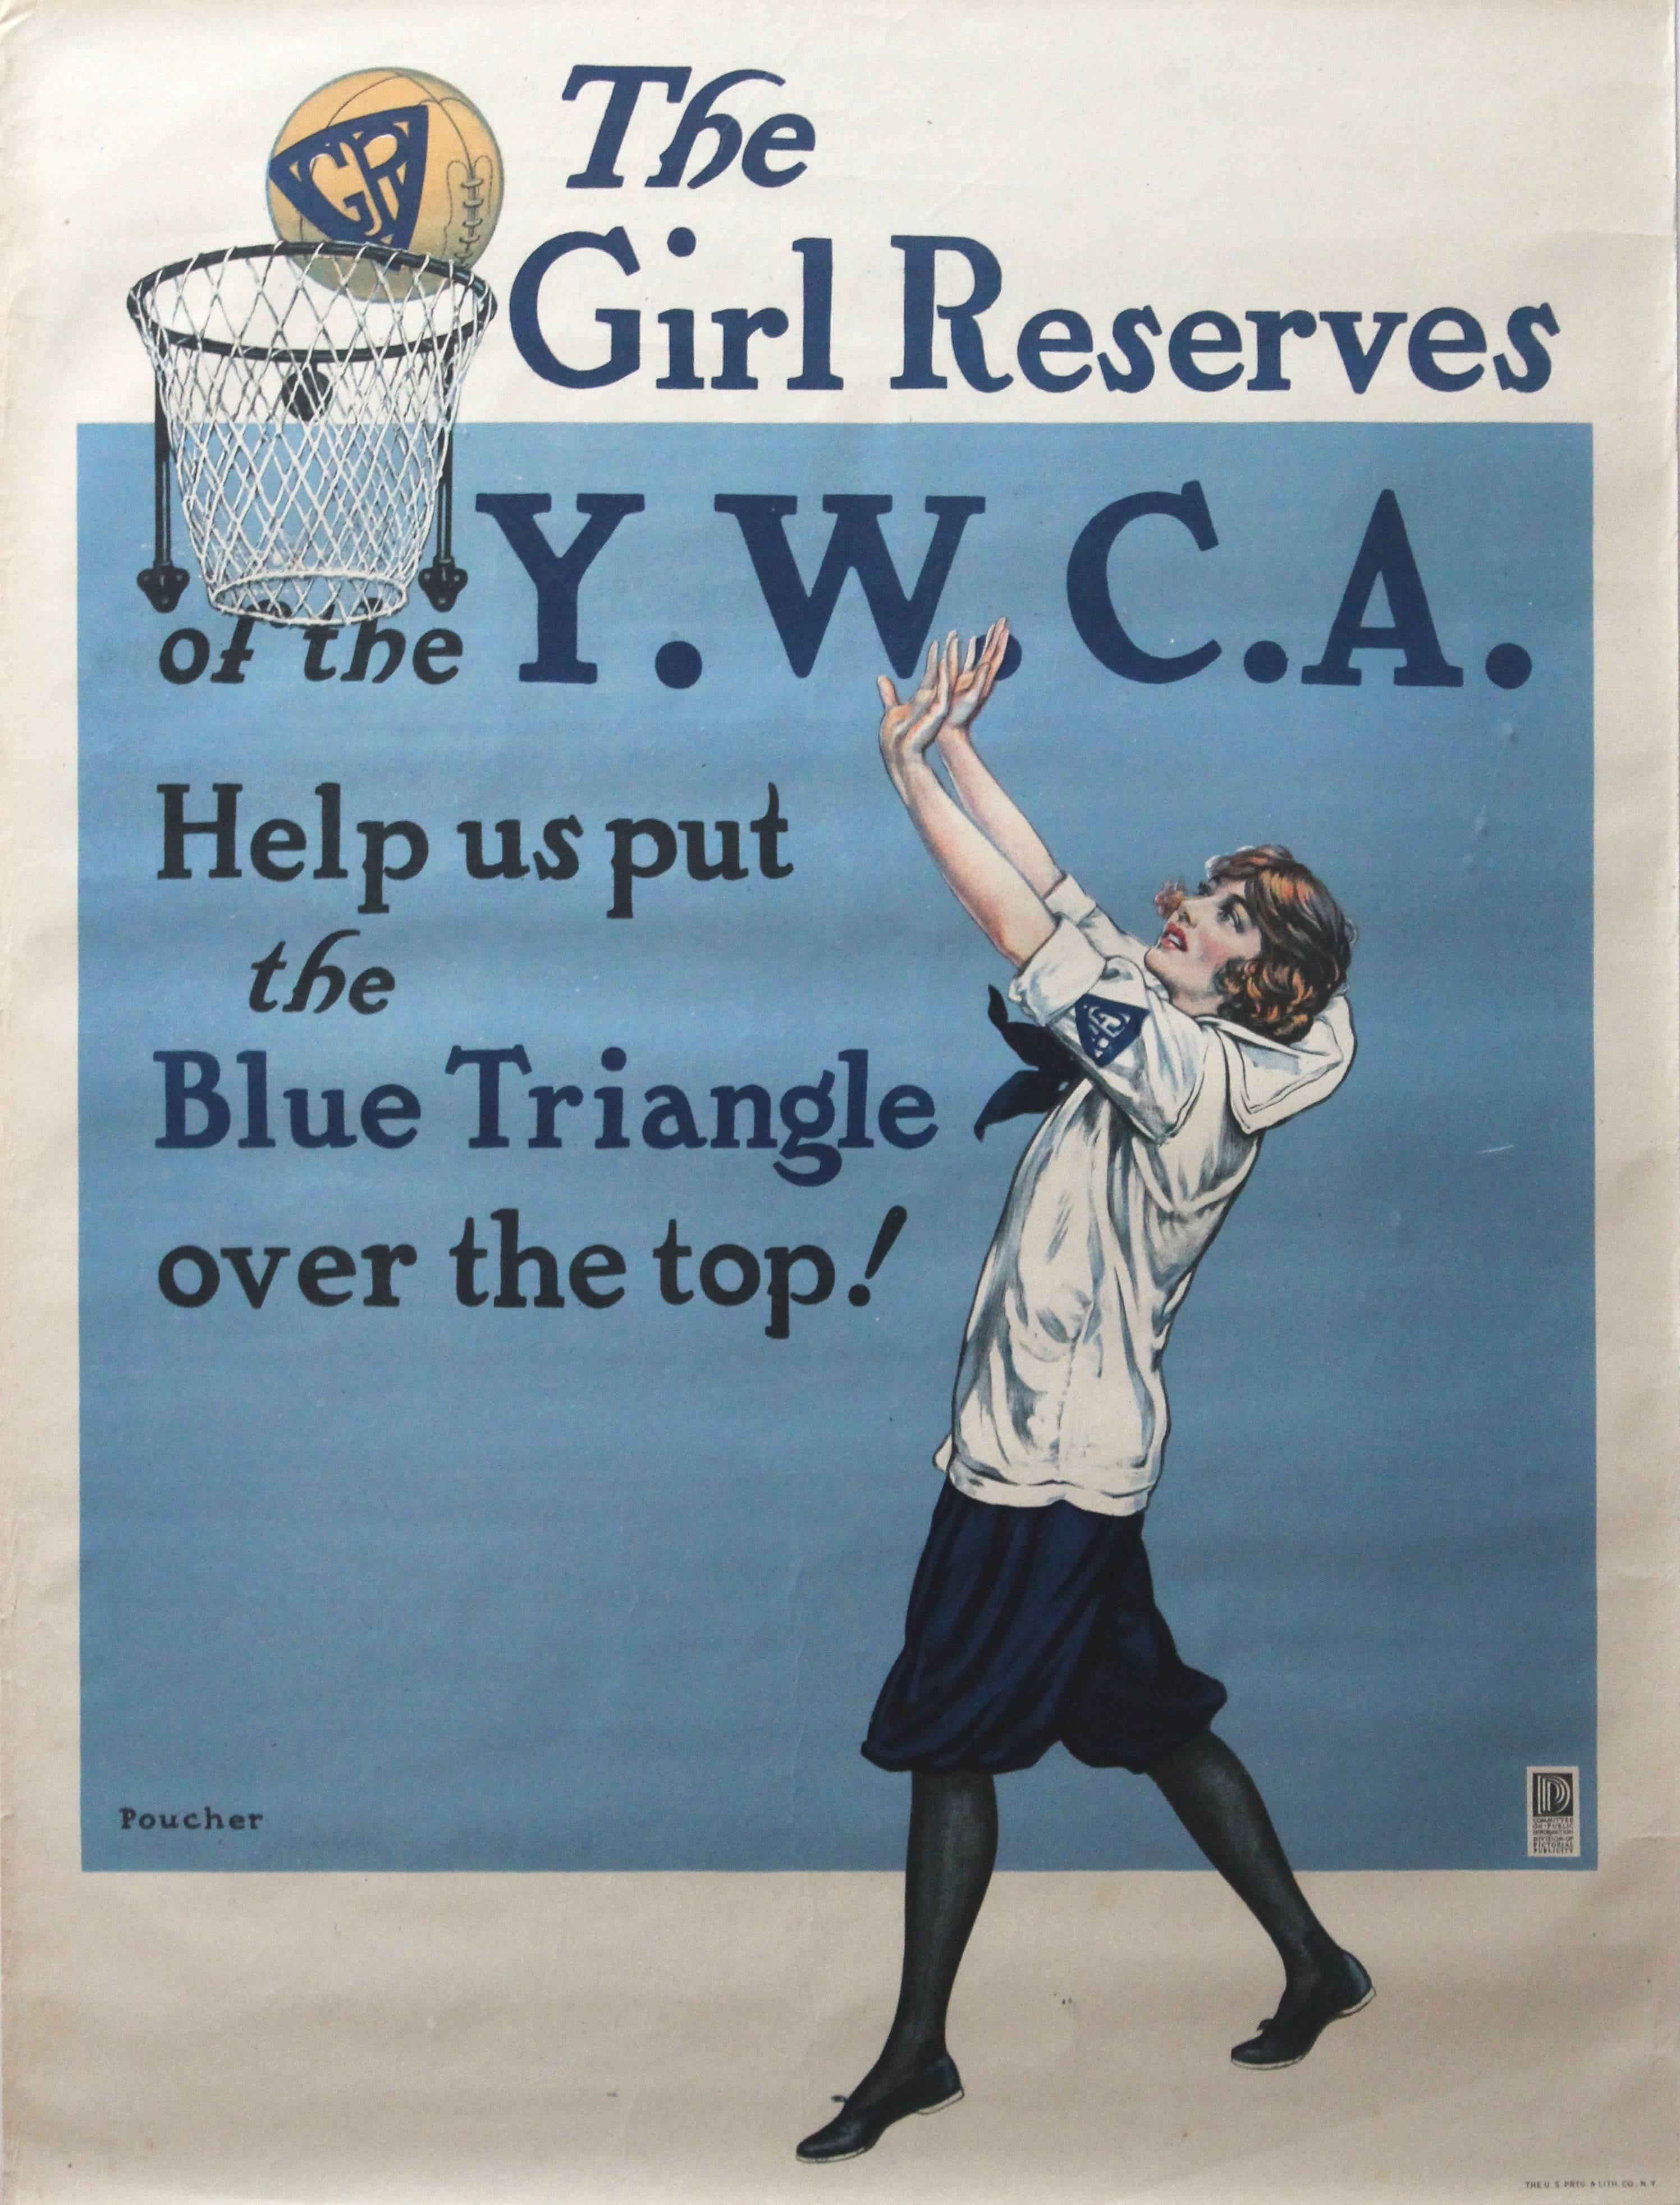 Edward Poucher Print - Rare Original WW1 Poster: The Girl Reserves Of The YWCA United War Work Campaign